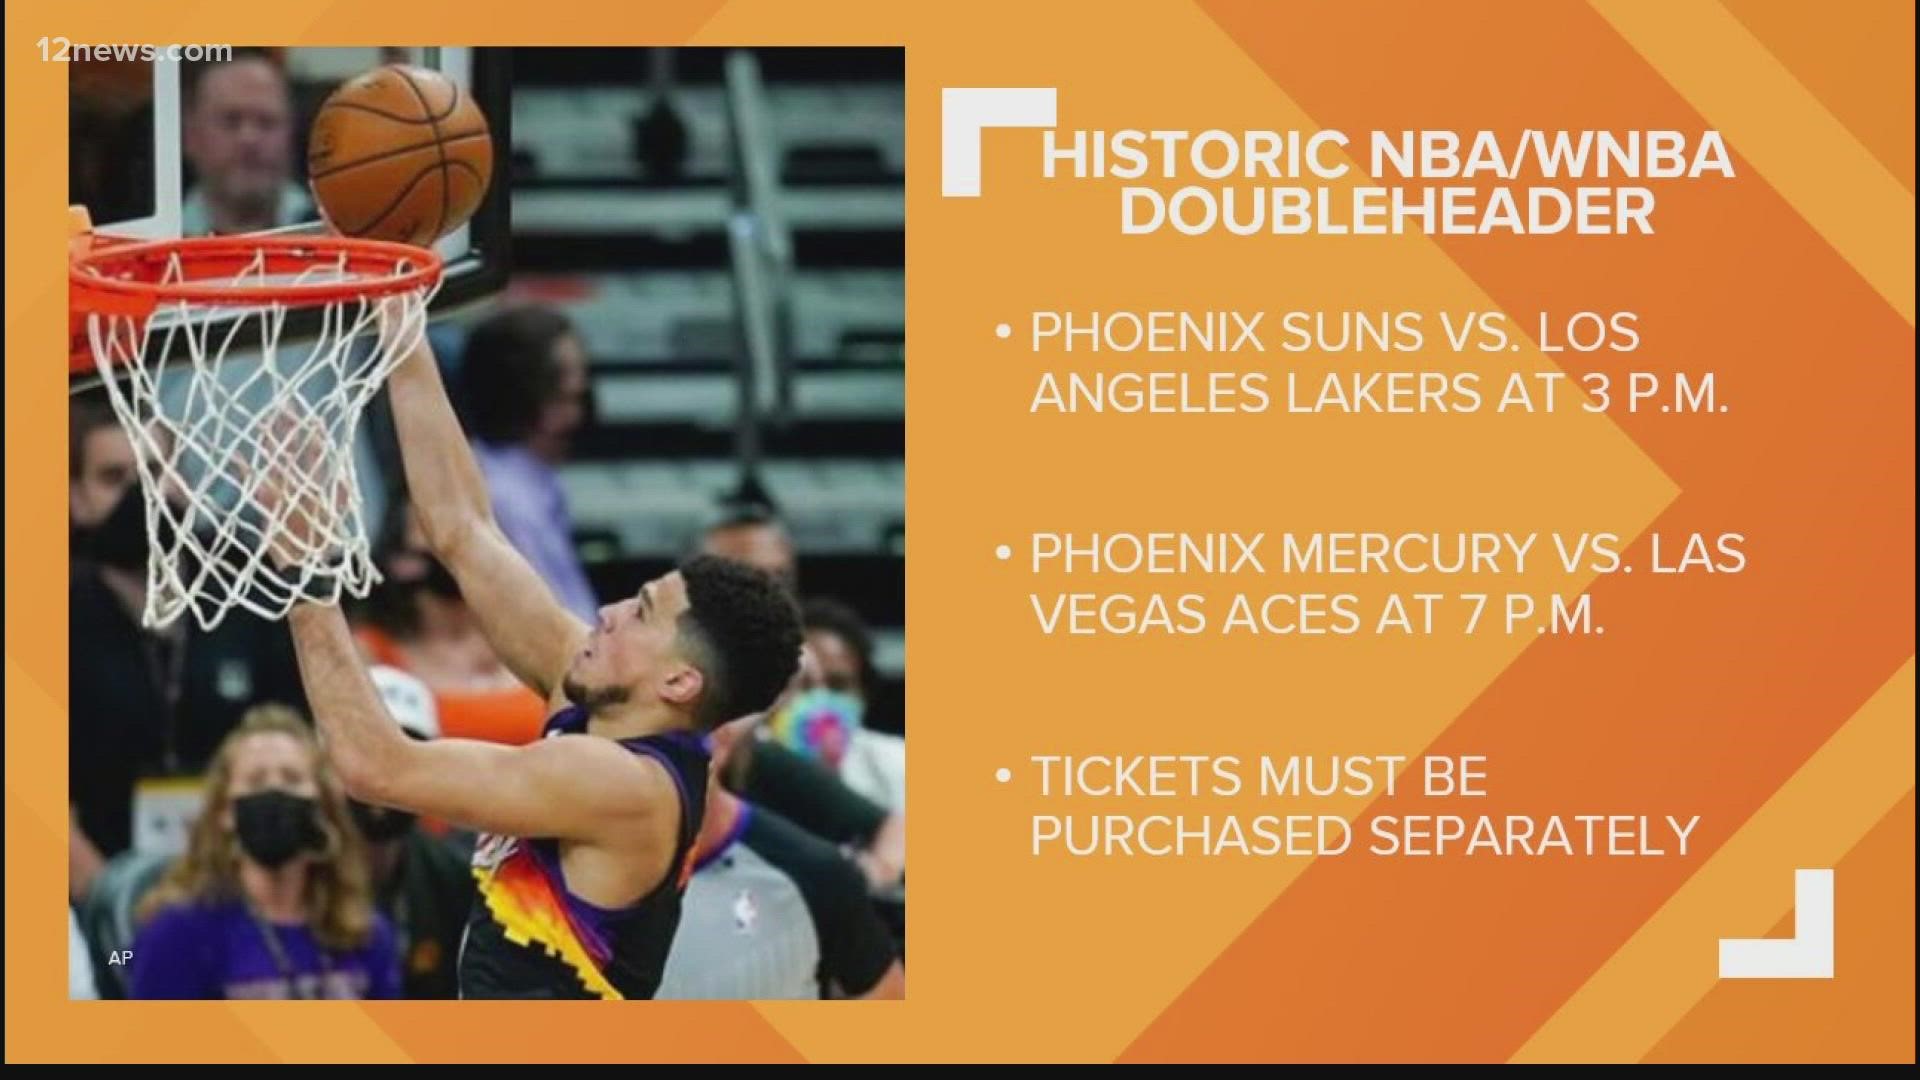 The Phoenix Suns are facing off against the Los Angeles Lakers and the Phoenix Mercury will be dueling the Las Vegas Aces.